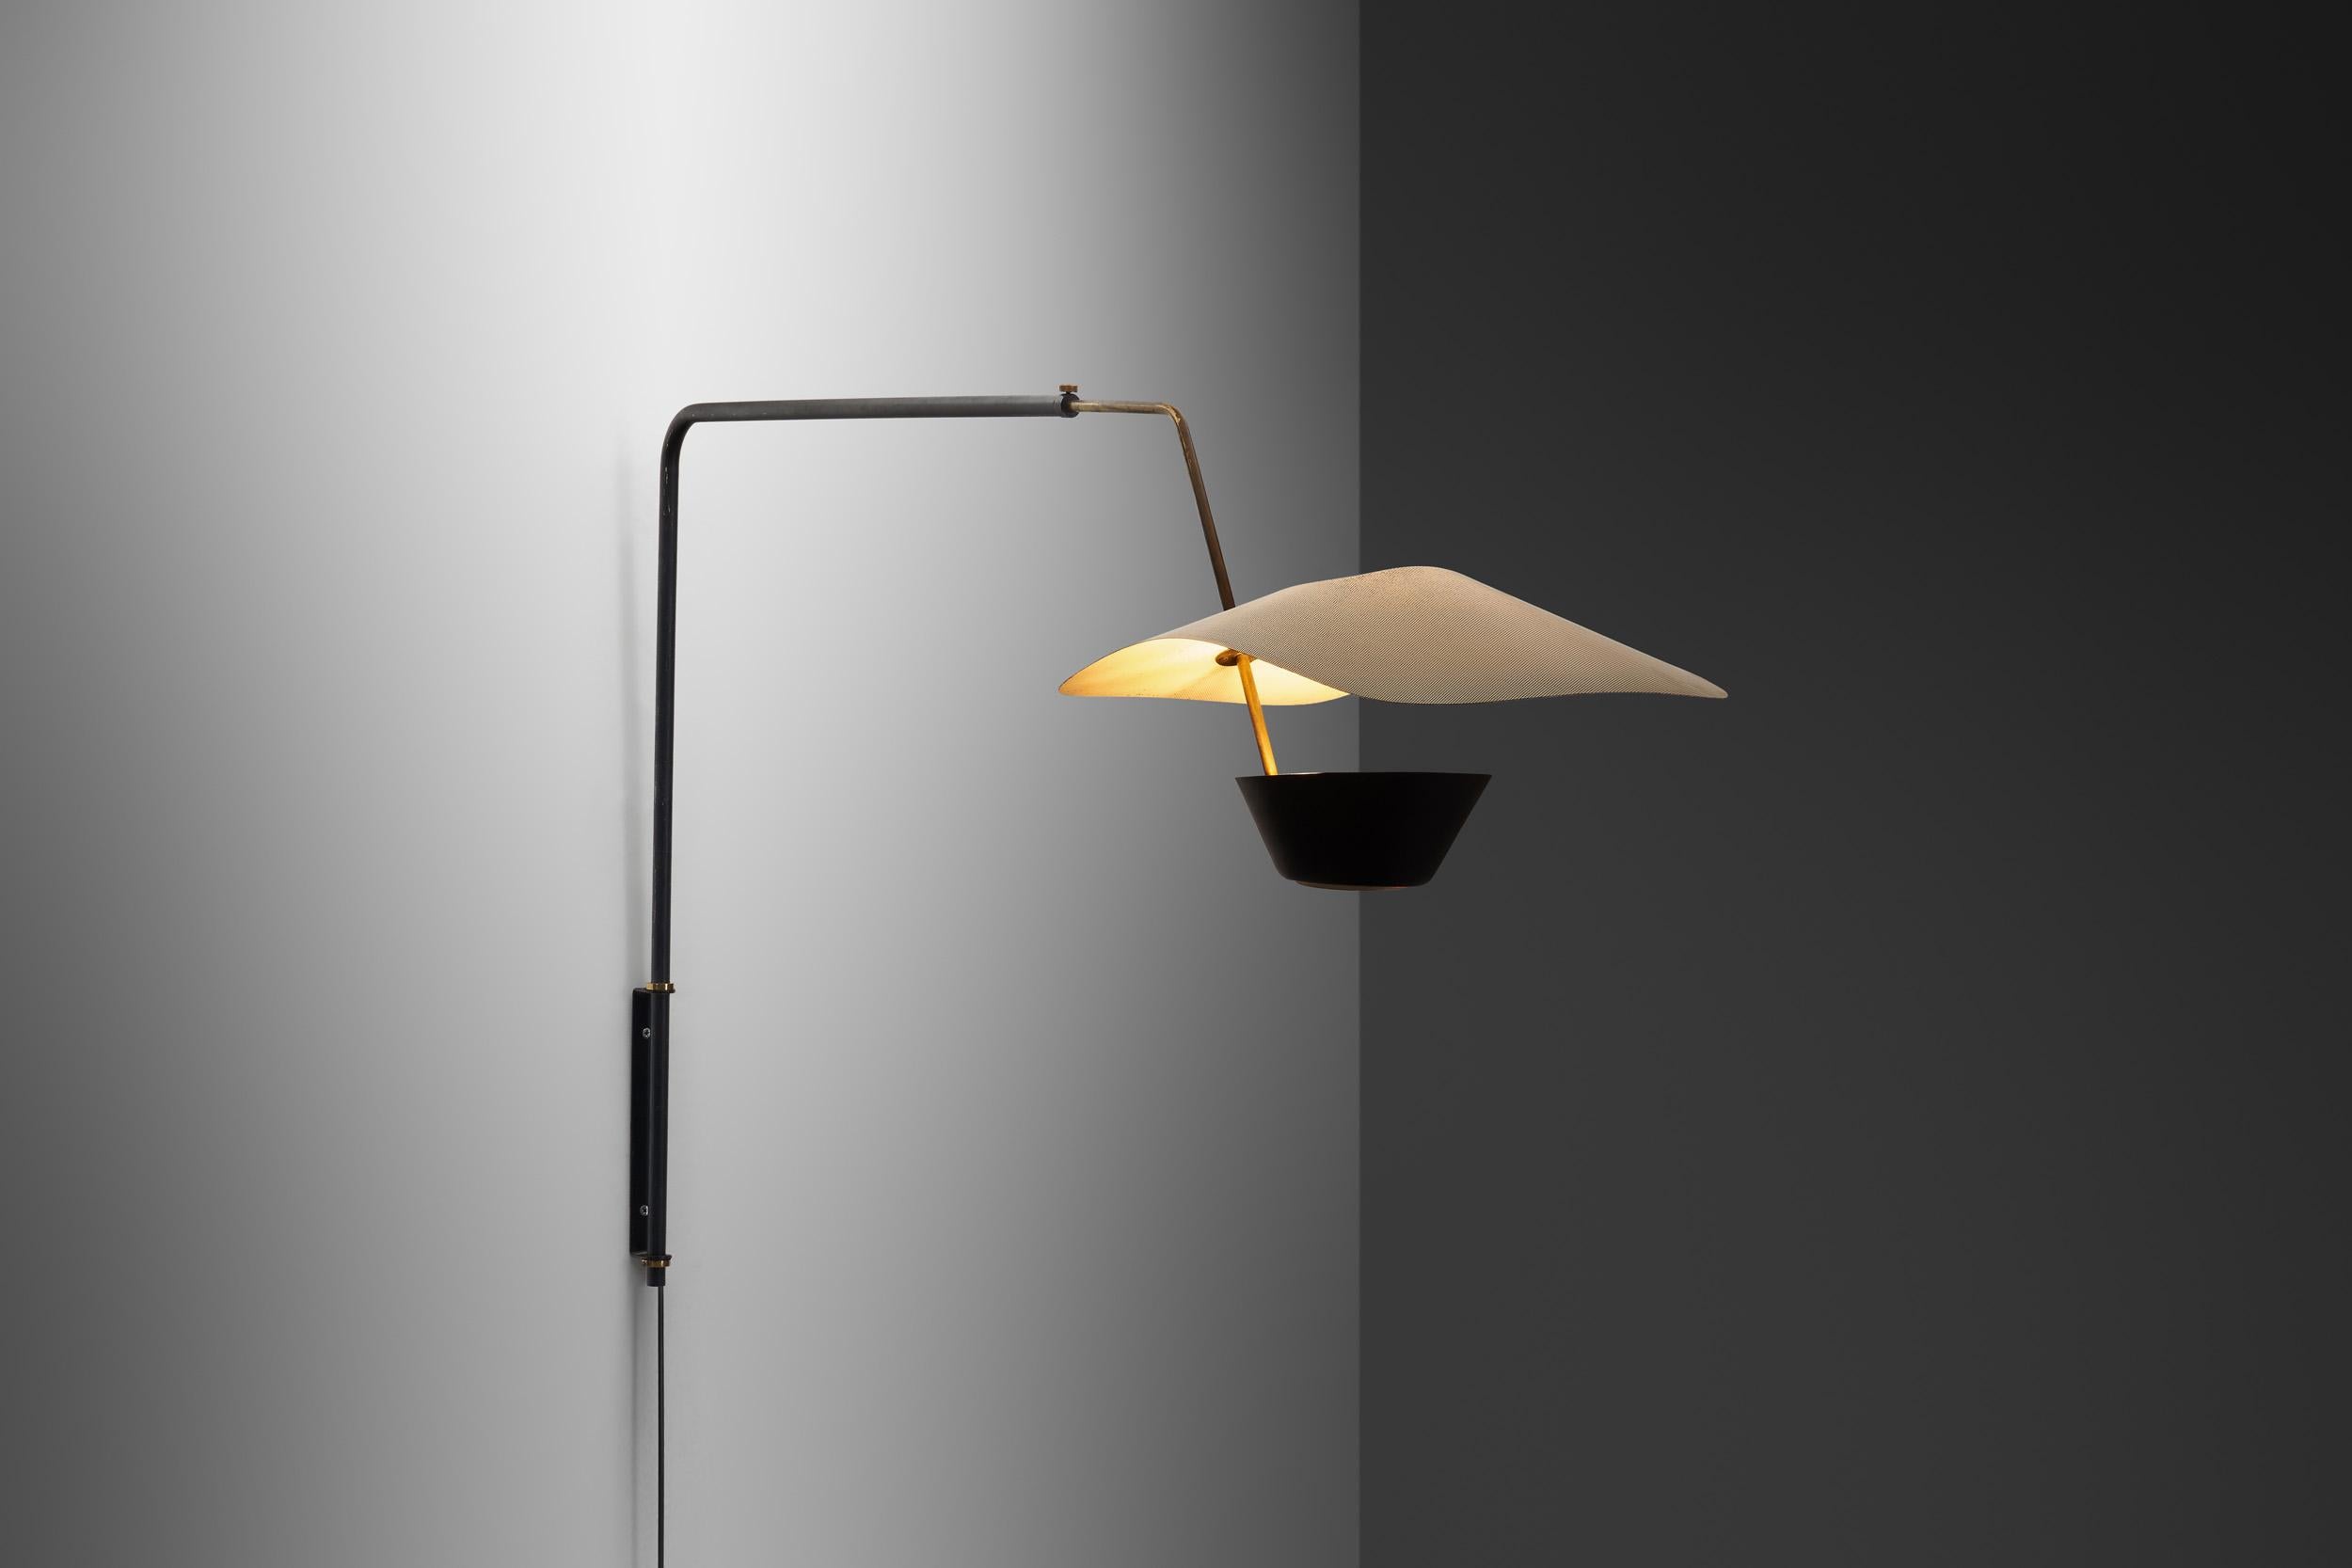 Like the “G30” model, this lamp is also better known by its nickname, Cerf-volant, or, “the kite”. This lamp is an elegant creation equipped with an atypical and structured reflector and an adjustable rod in brushed varnished brass.

This wall